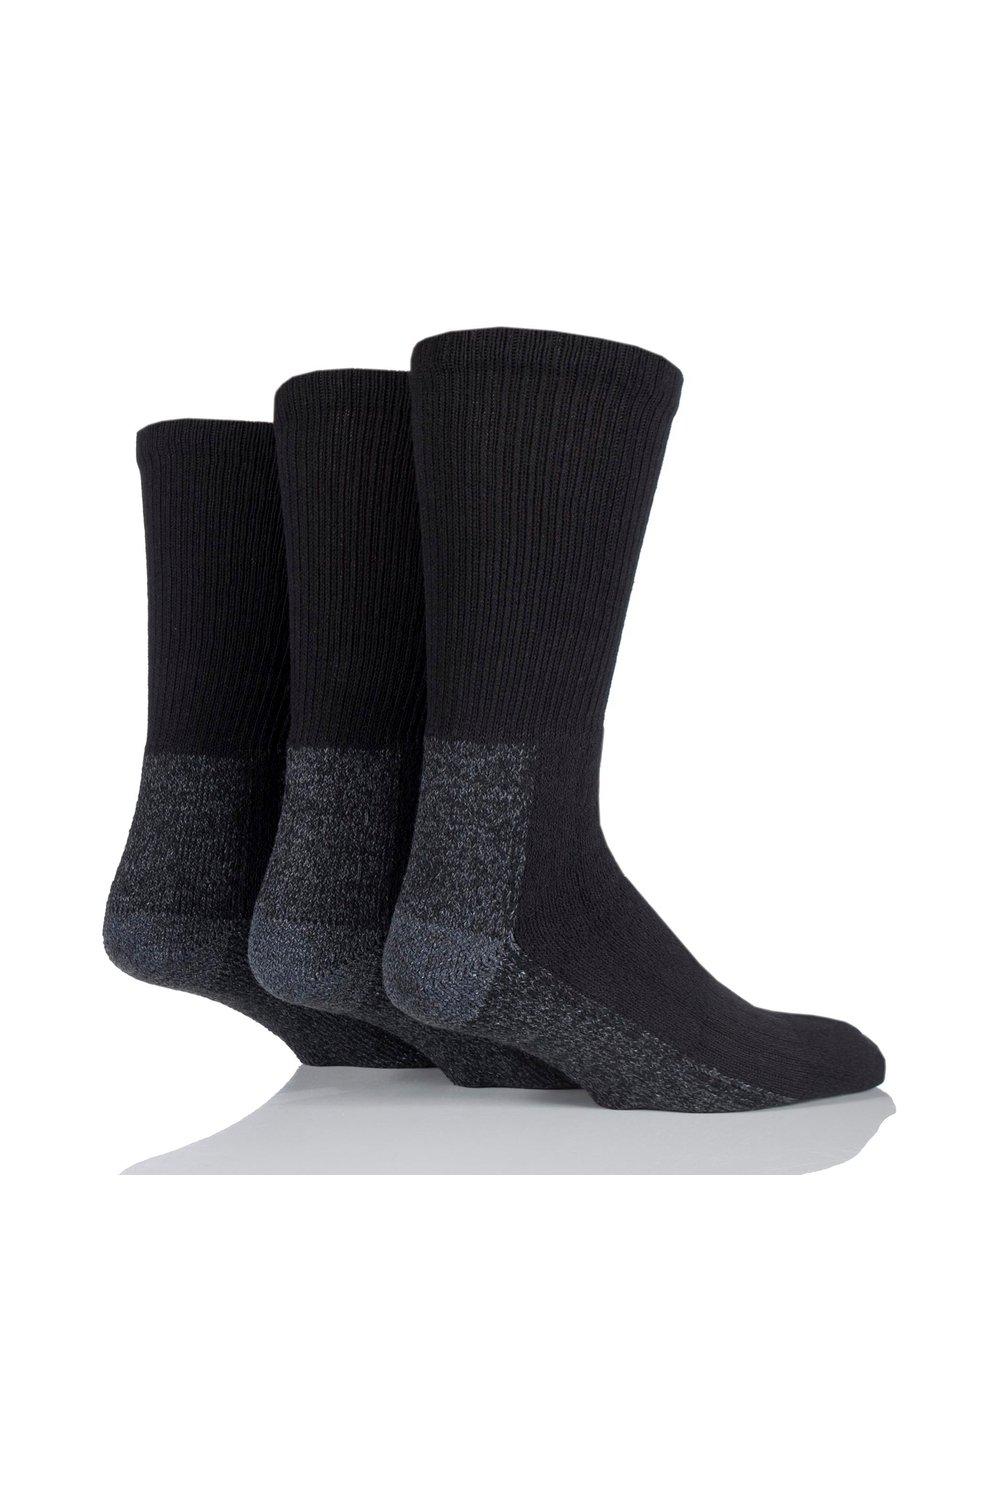 3 Pair Calf Length Safety Boot Socks Size 12 - 14 In Black